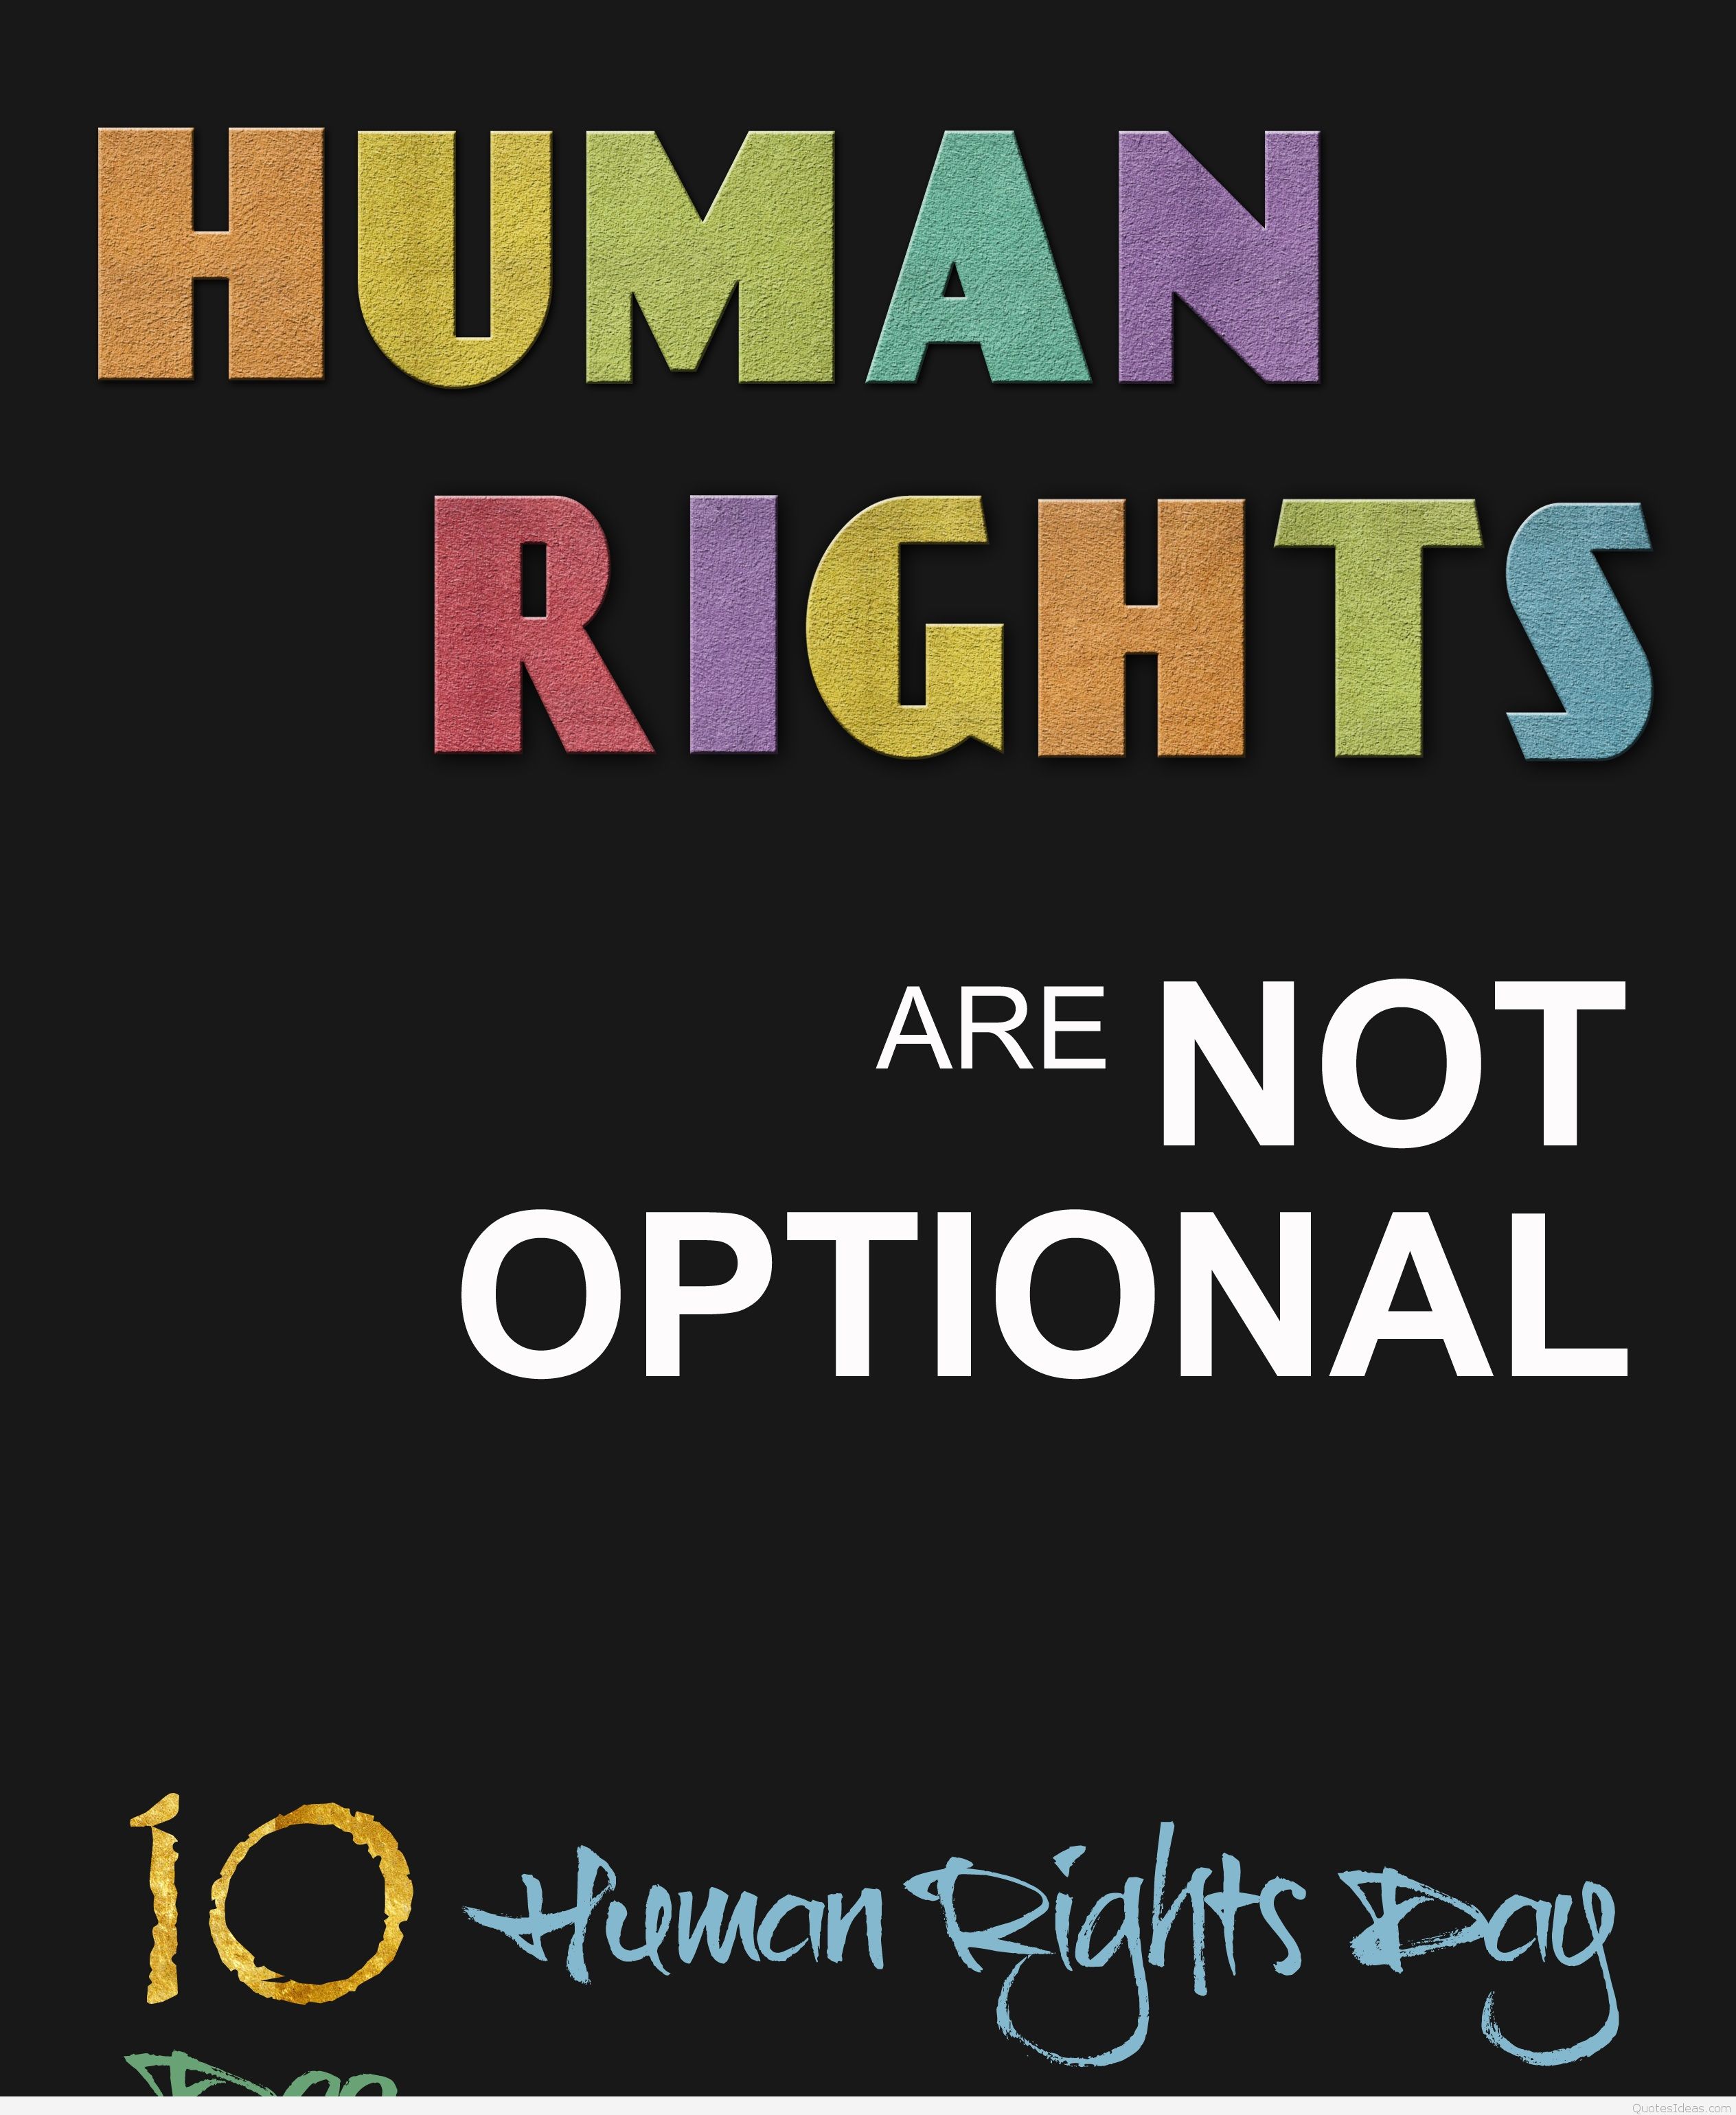 Human rights are not optional